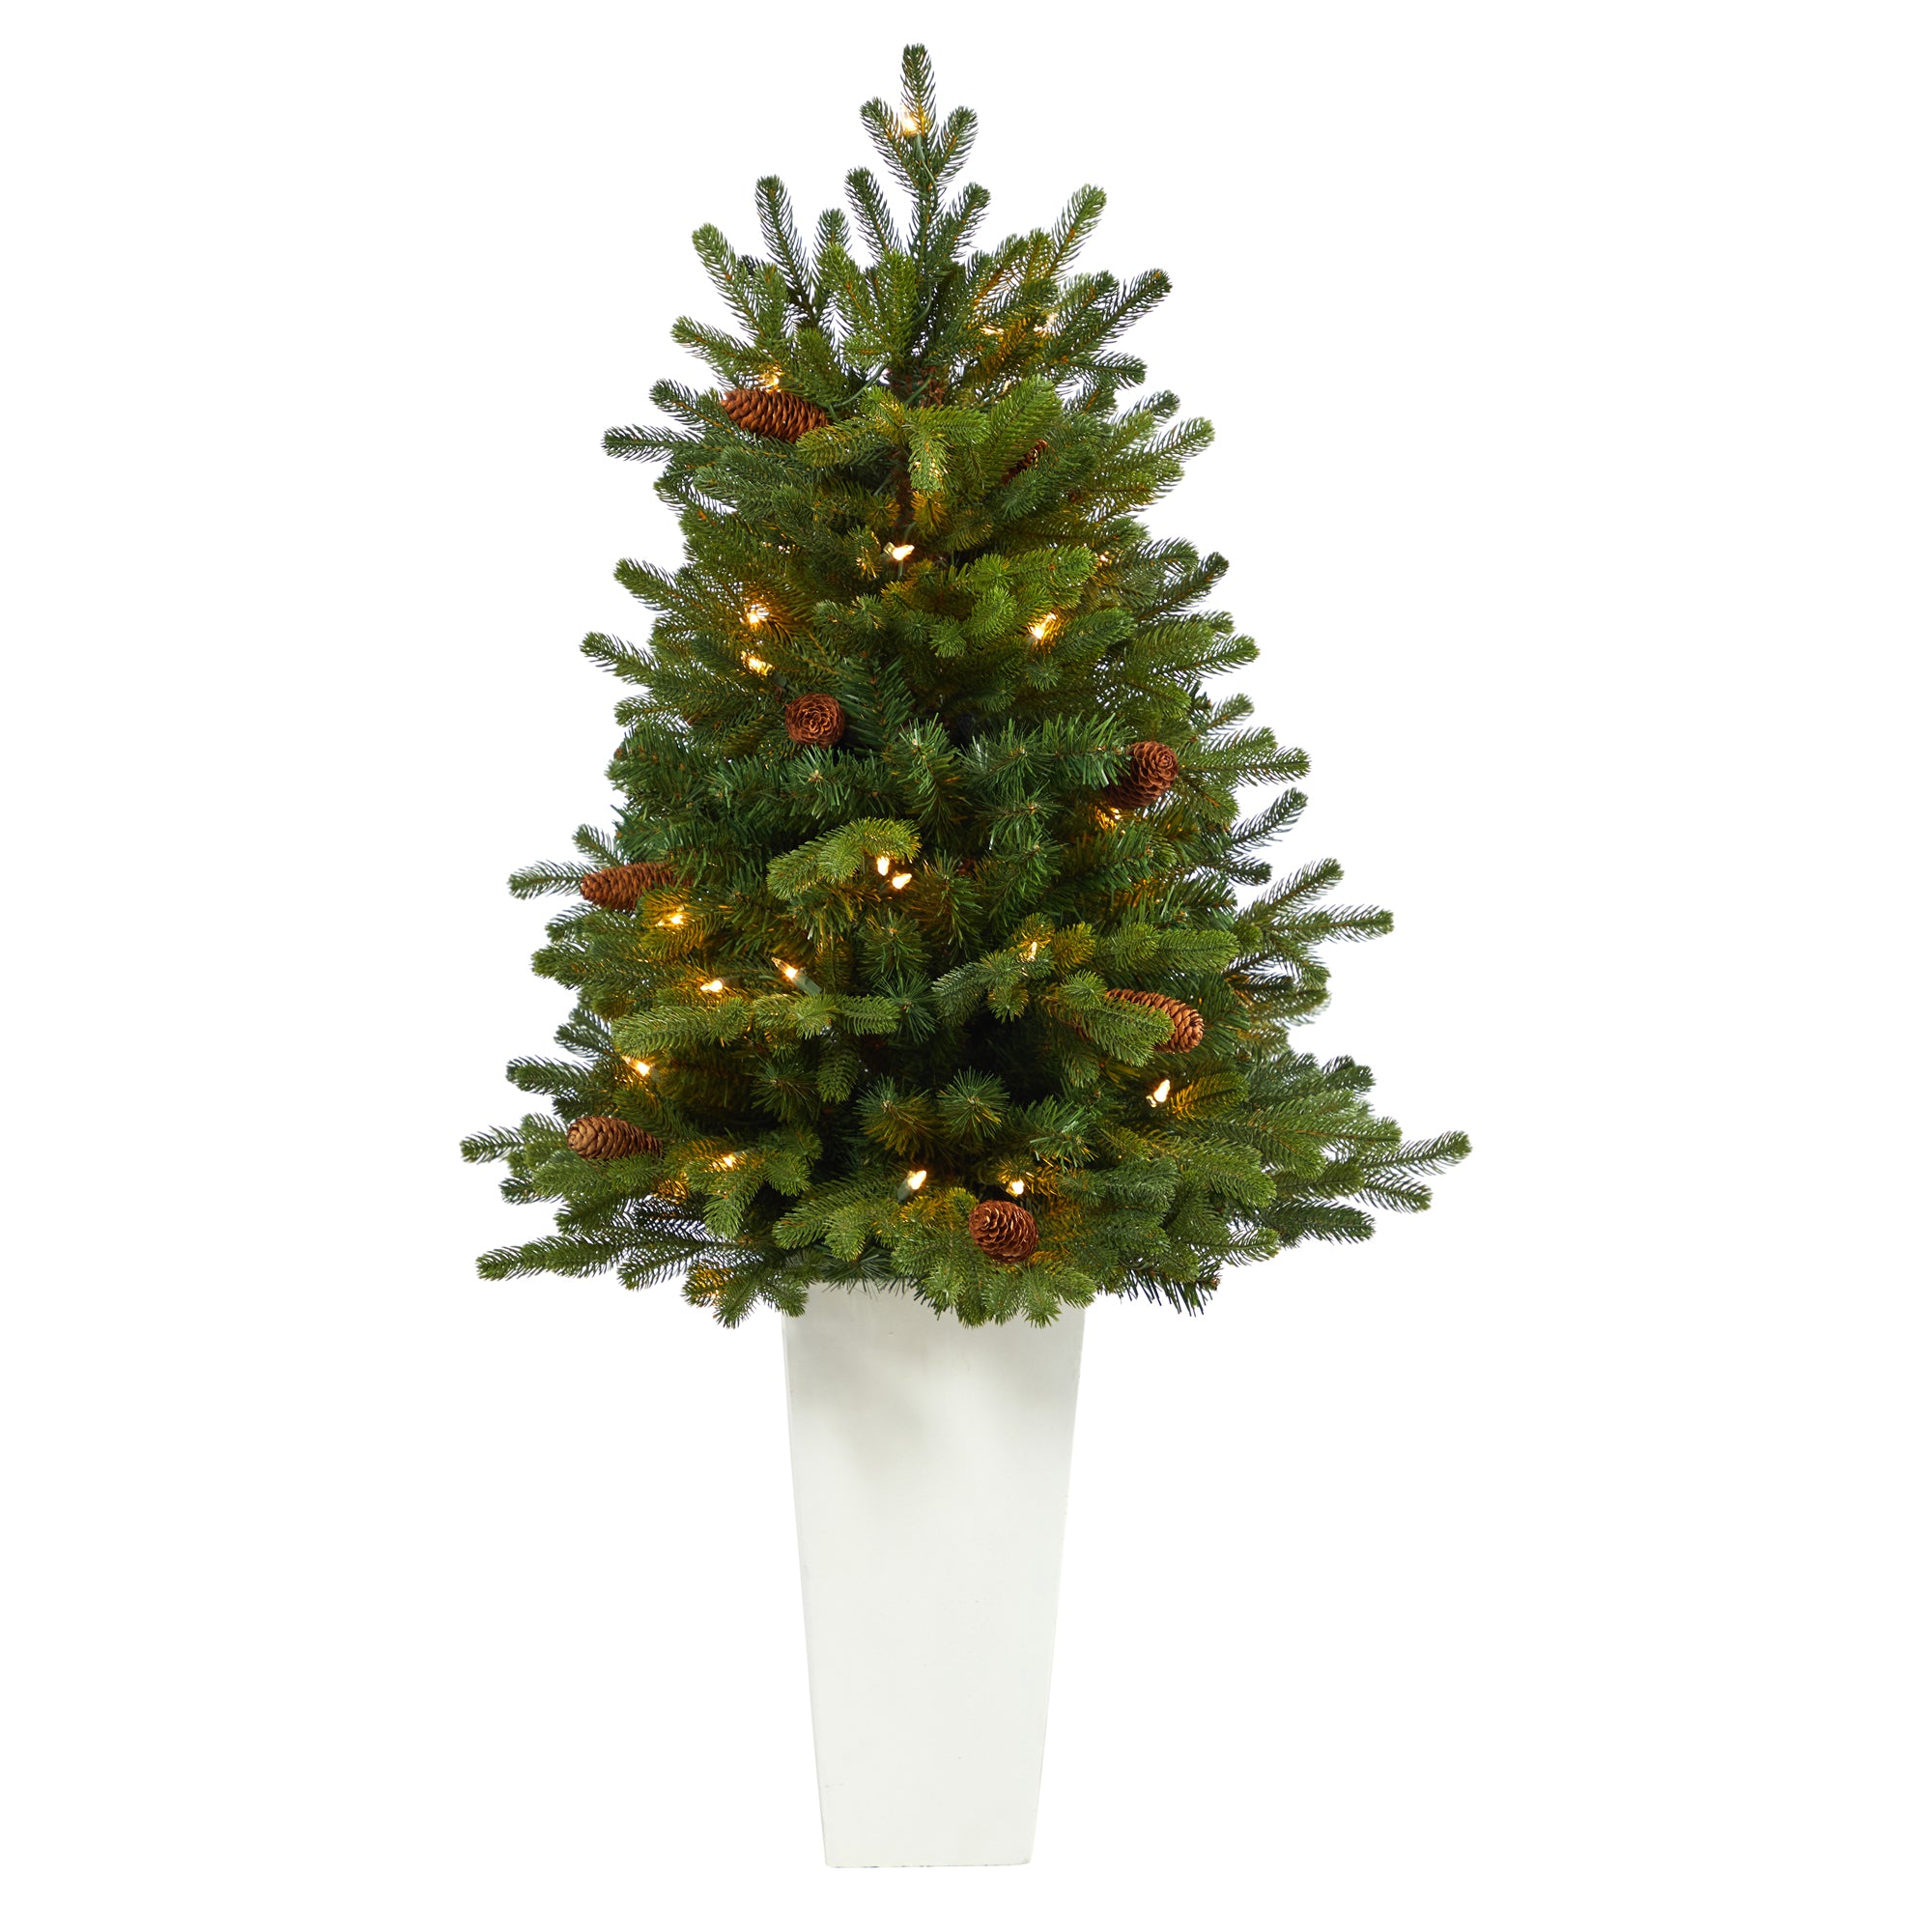 3.5' Yukon Mountain Fir Artificial Christmas Tree with 50 Clear Lights and Pine Cones in White Planter